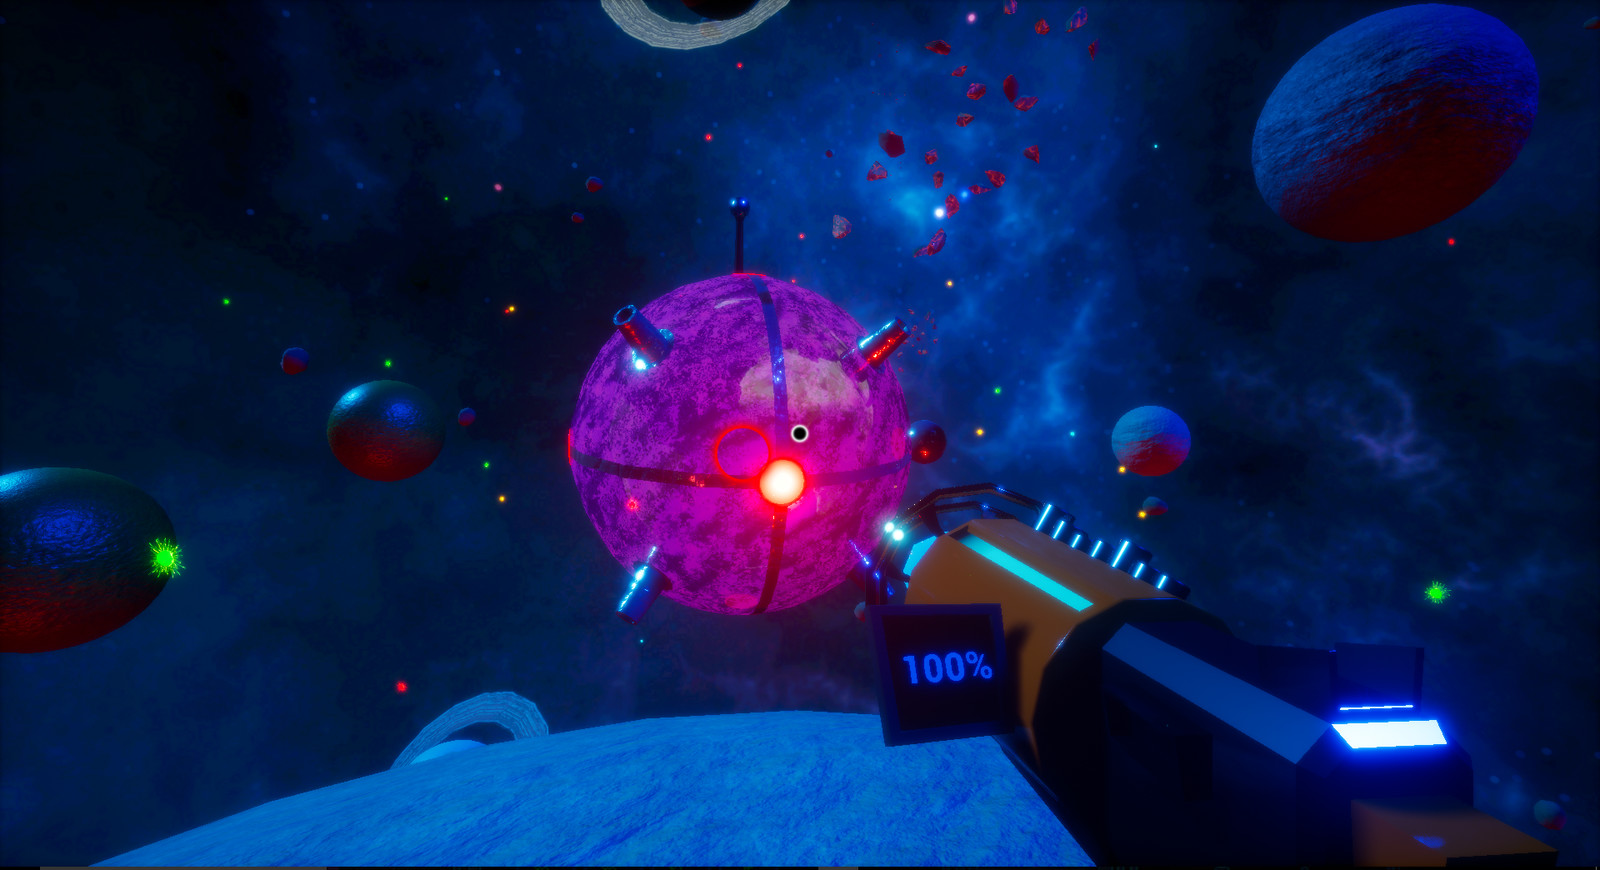 Ingame screenshot of the main boss taken from the firstperson player perspective